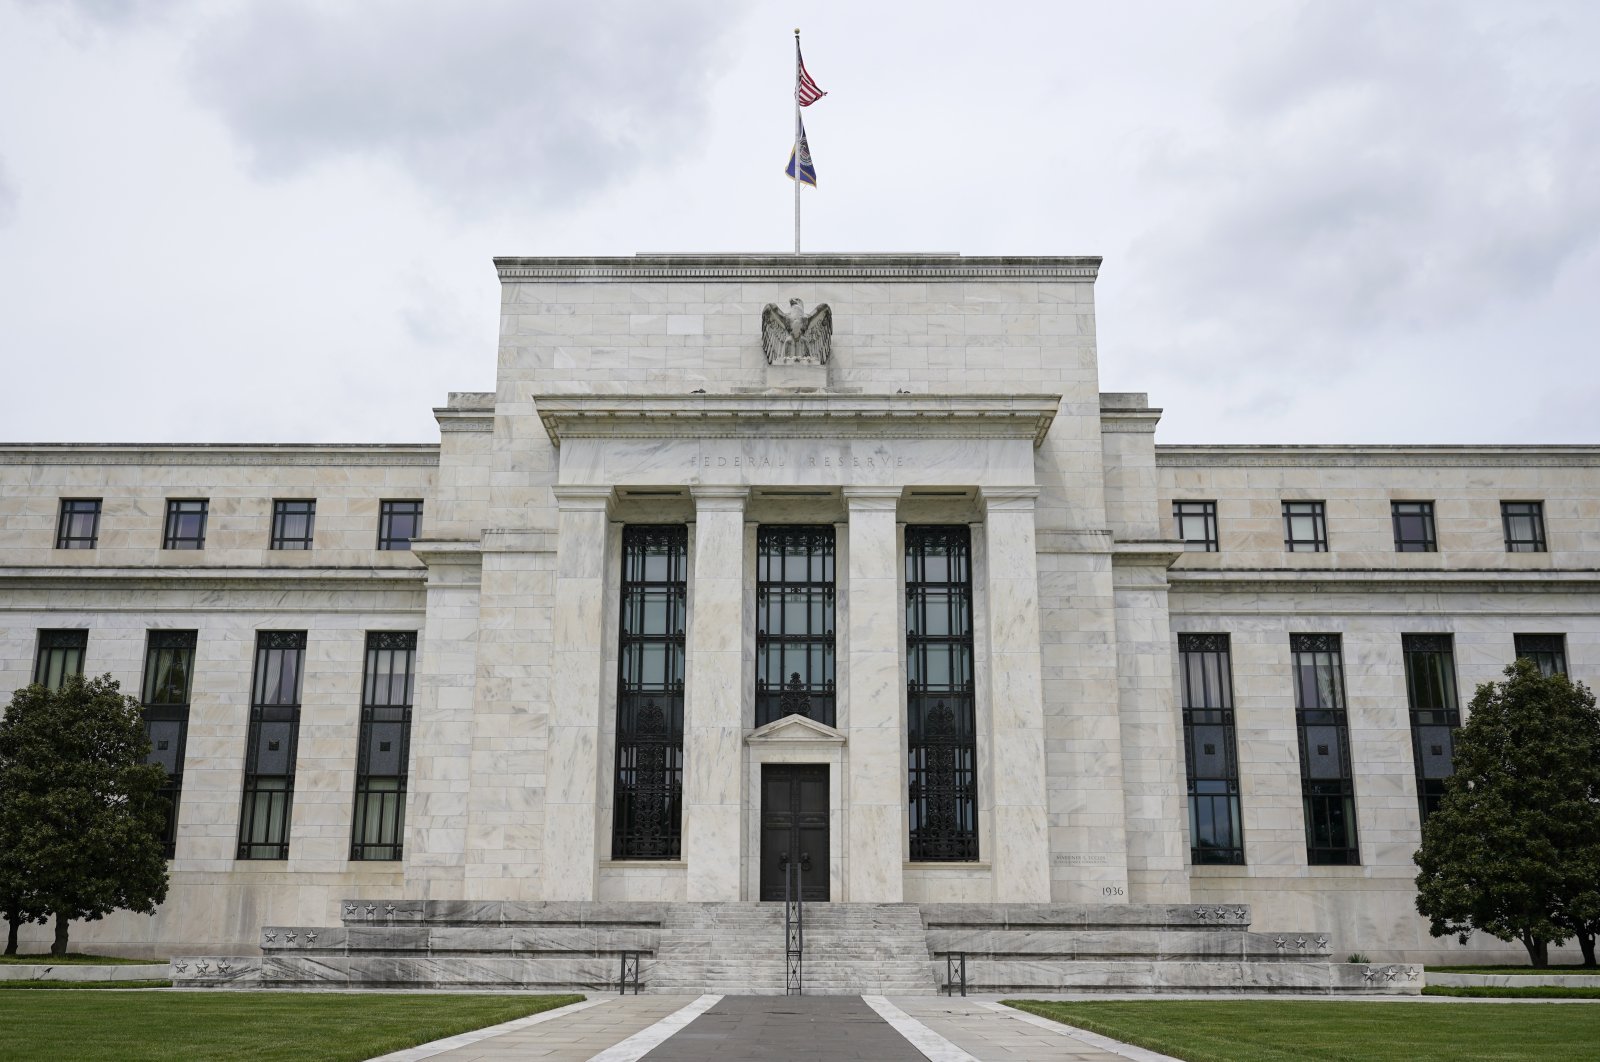 The Federal Reserve building in Washington, D.C., U.S., May 4, 2021. (AP Photo)